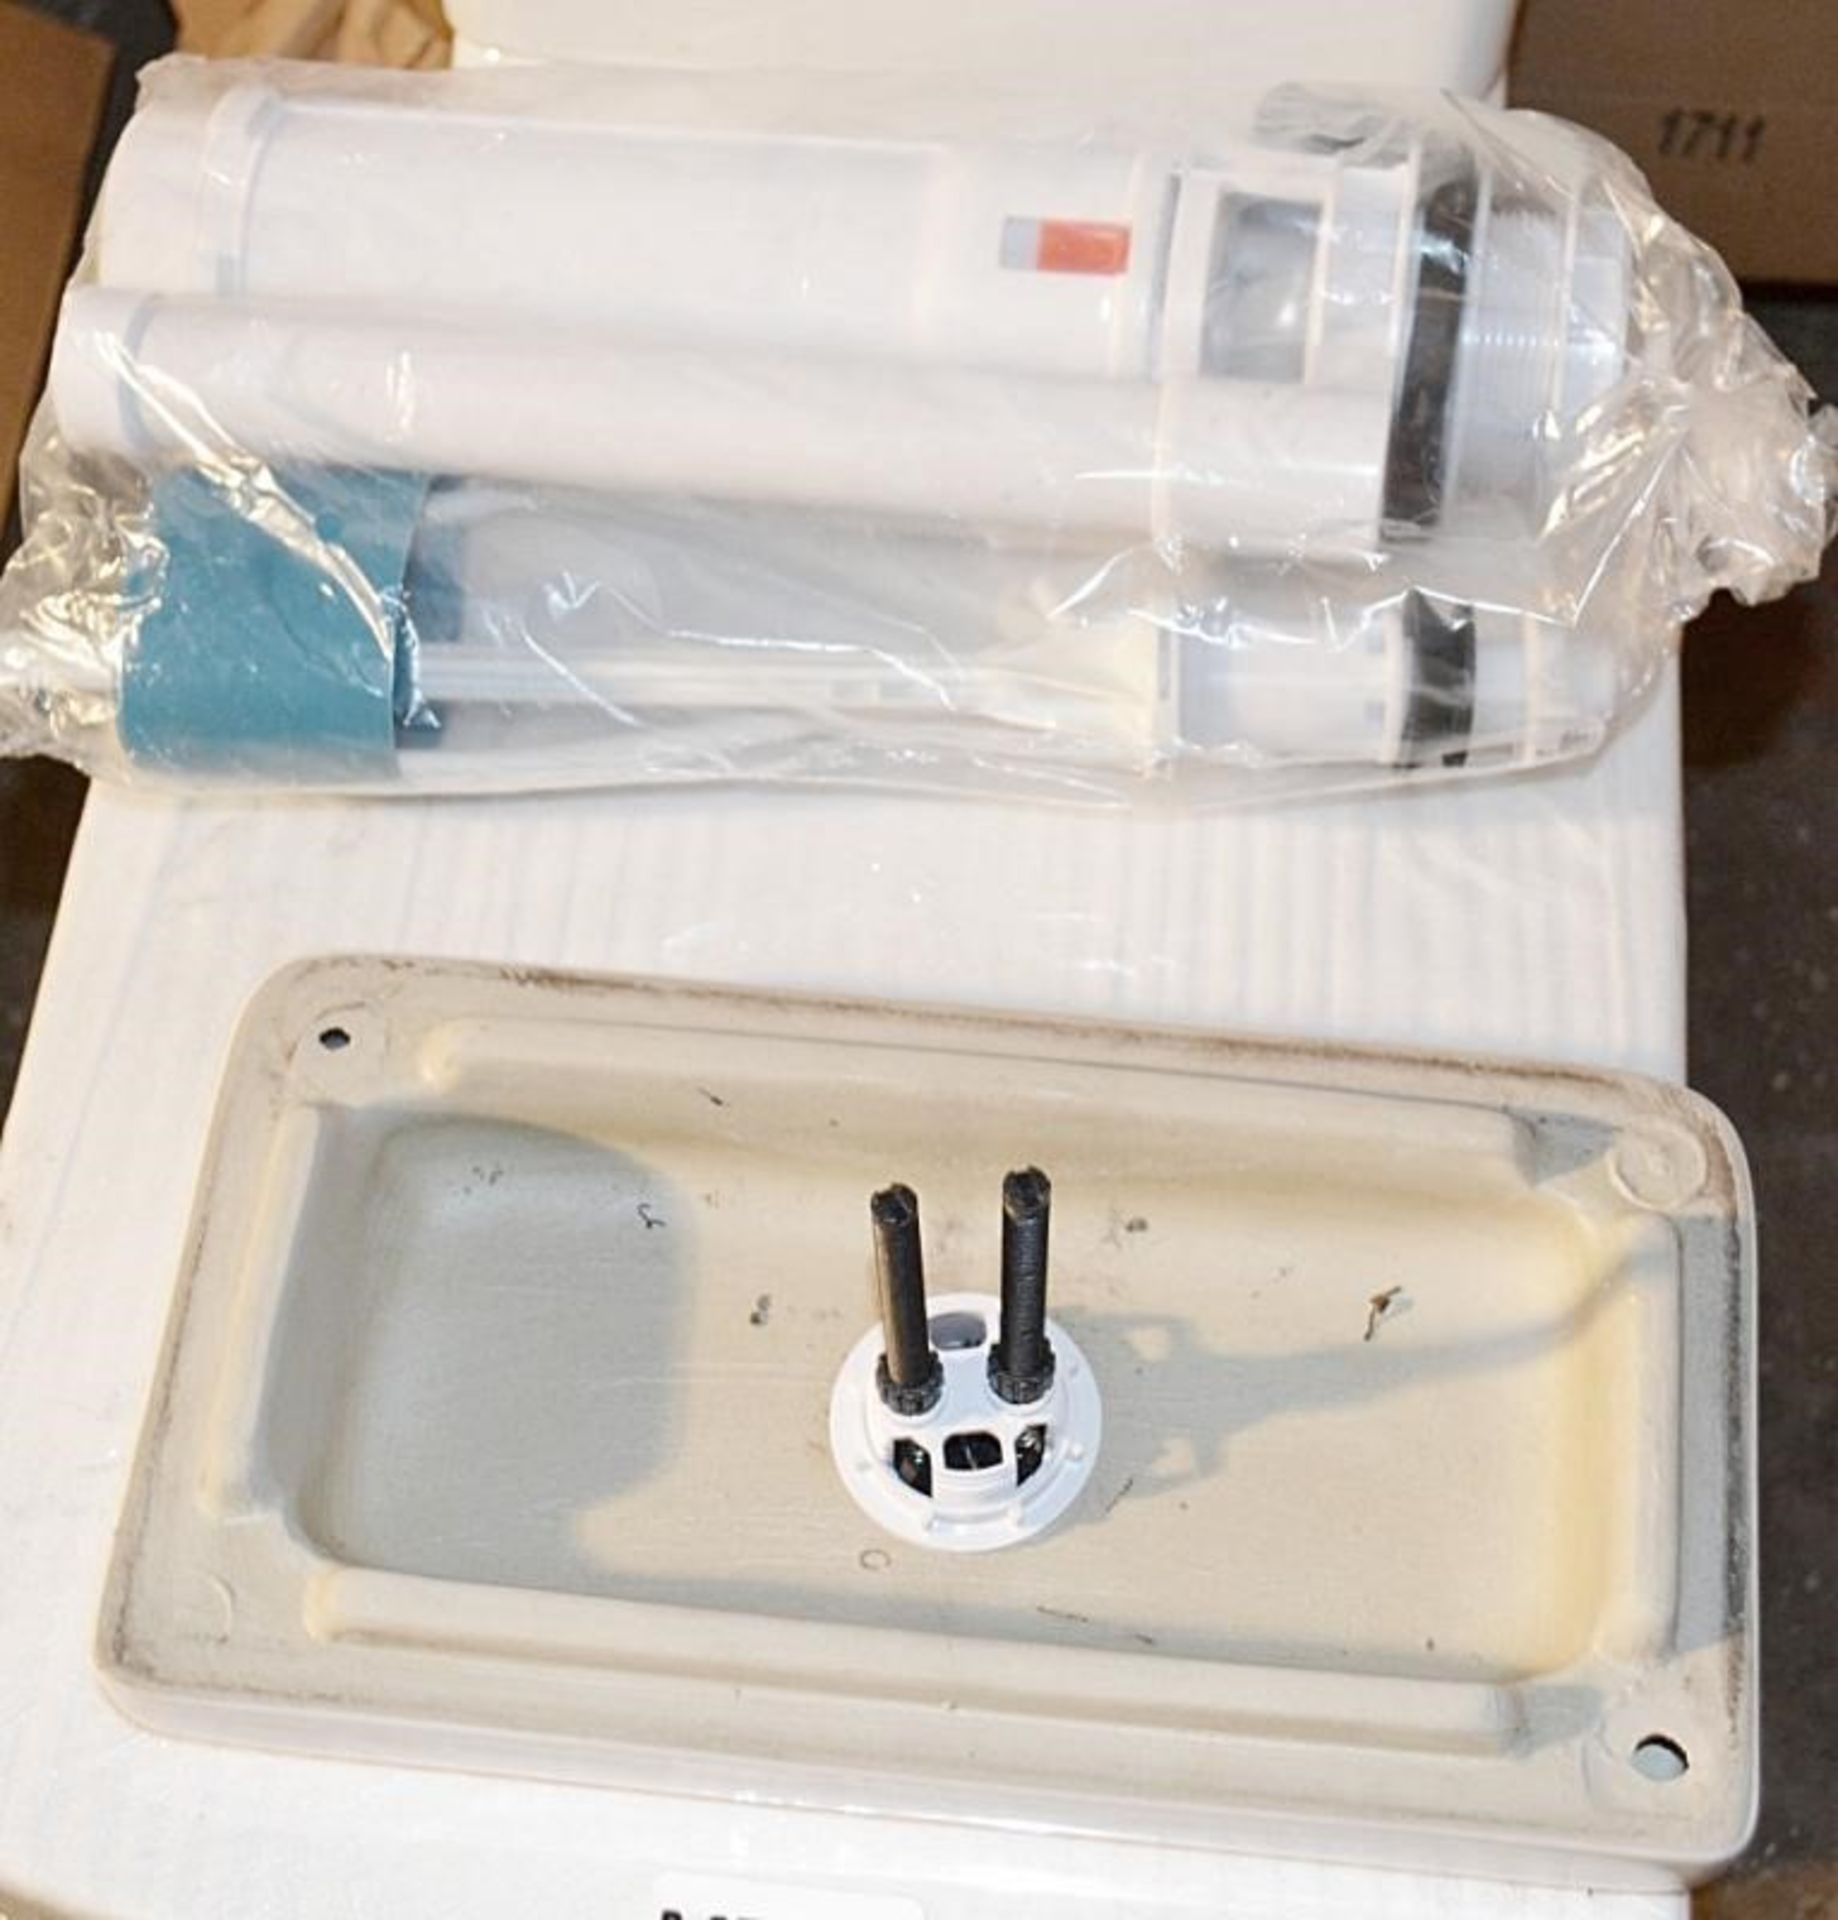 1 x Close Coupled Toilet Pan With Soft Close Toilet Seat And Cistern (Inc. Fittings) - Brand New Box - Image 6 of 9